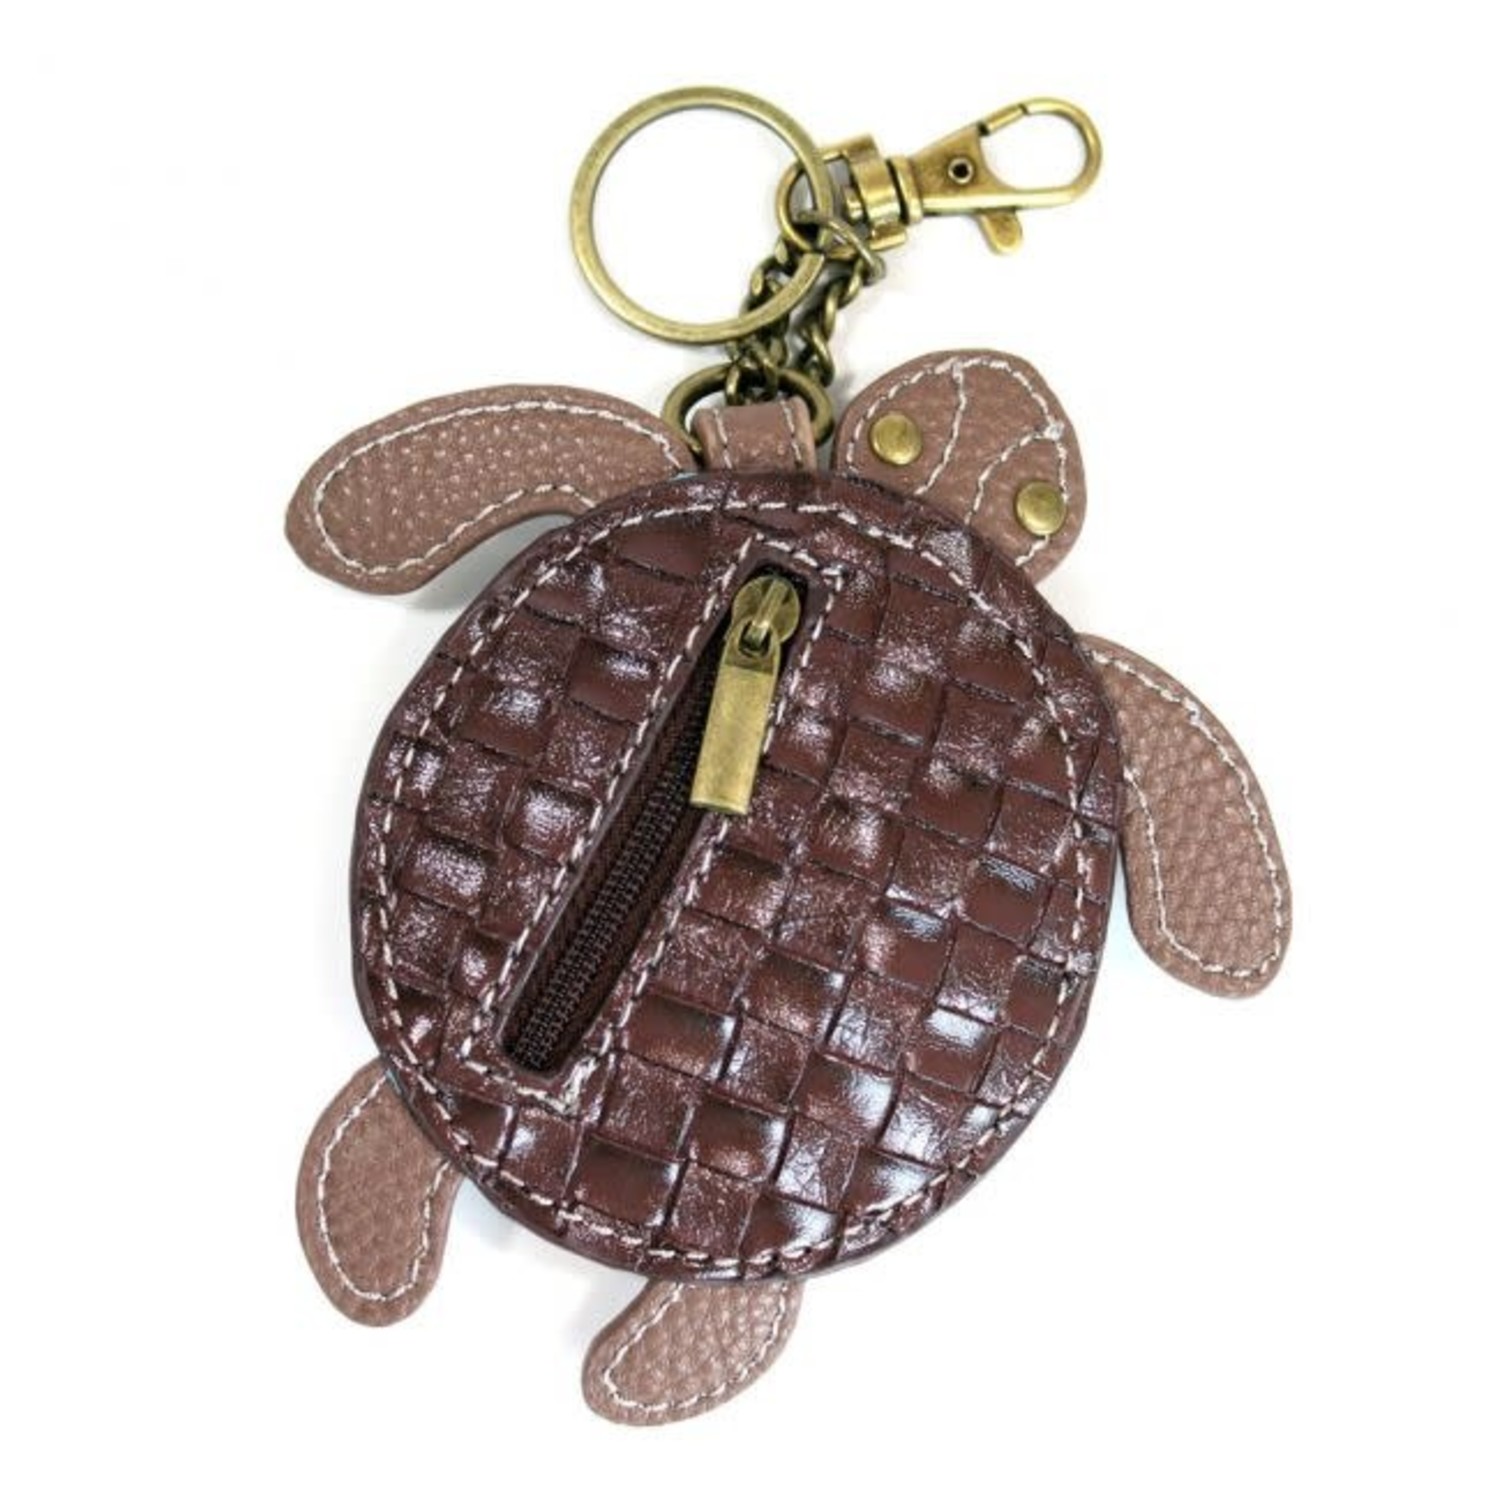 Hand Crafted | Bags | Turtle Leather Coin Purse | Poshmark